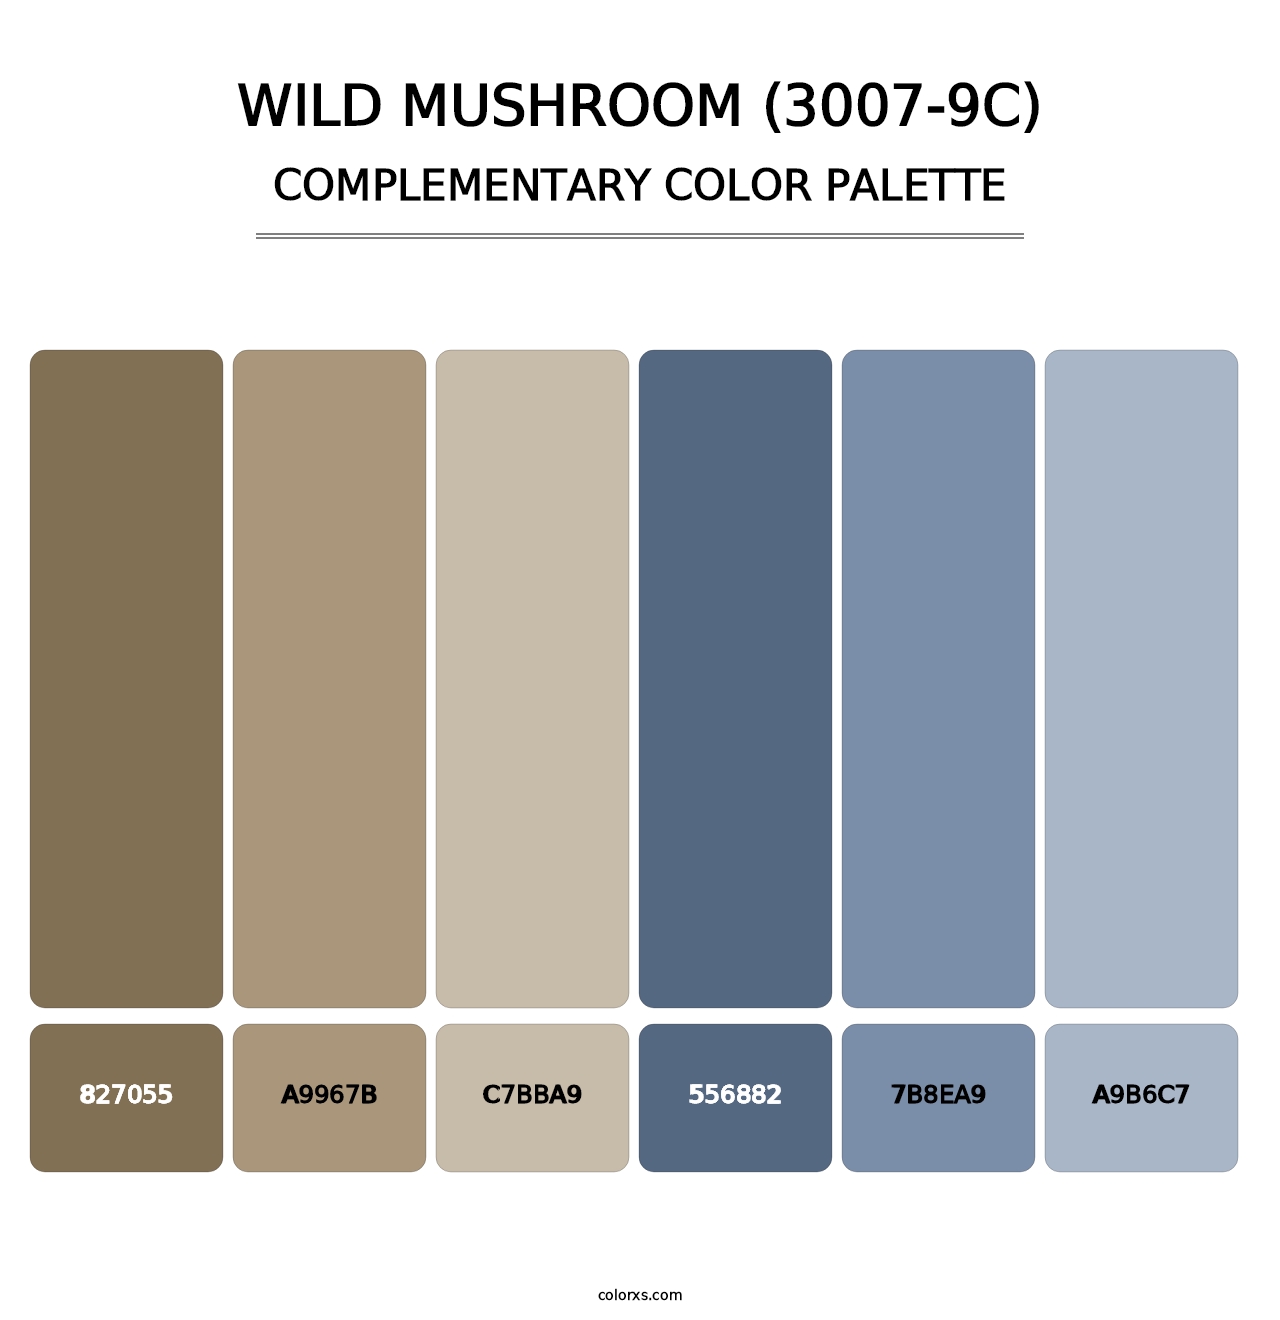 Wild Mushroom (3007-9C) - Complementary Color Palette